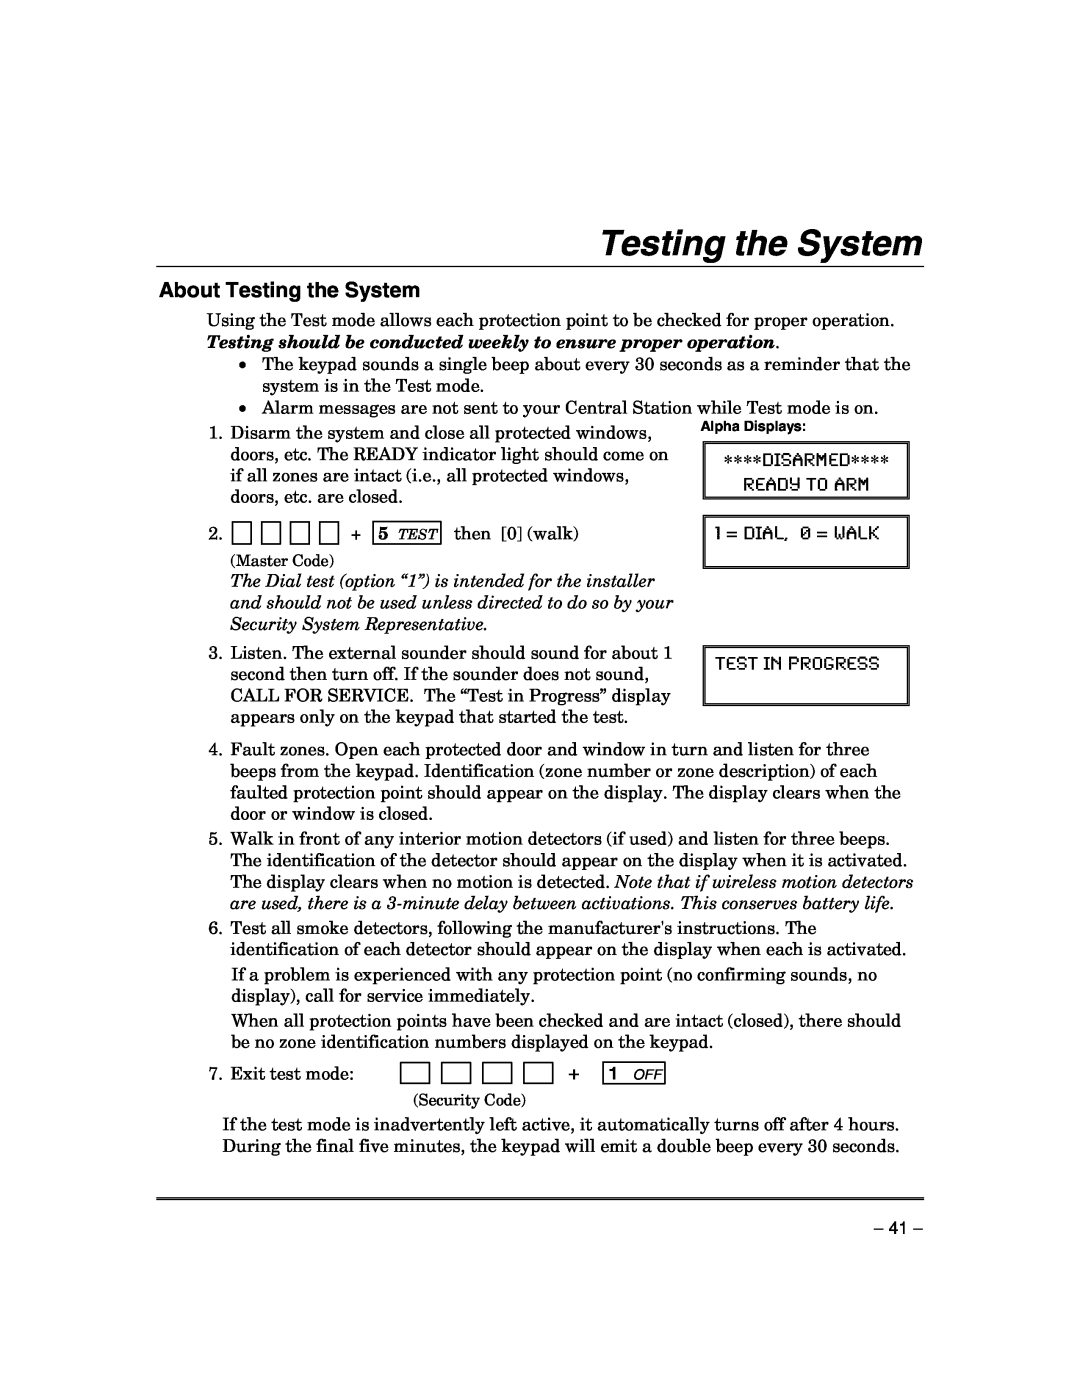 Honeywell VISTA-21IPSIA manual About Testing the System, READY TO ARM 1 = DIAL, 0 = WALK, Test In Progress 